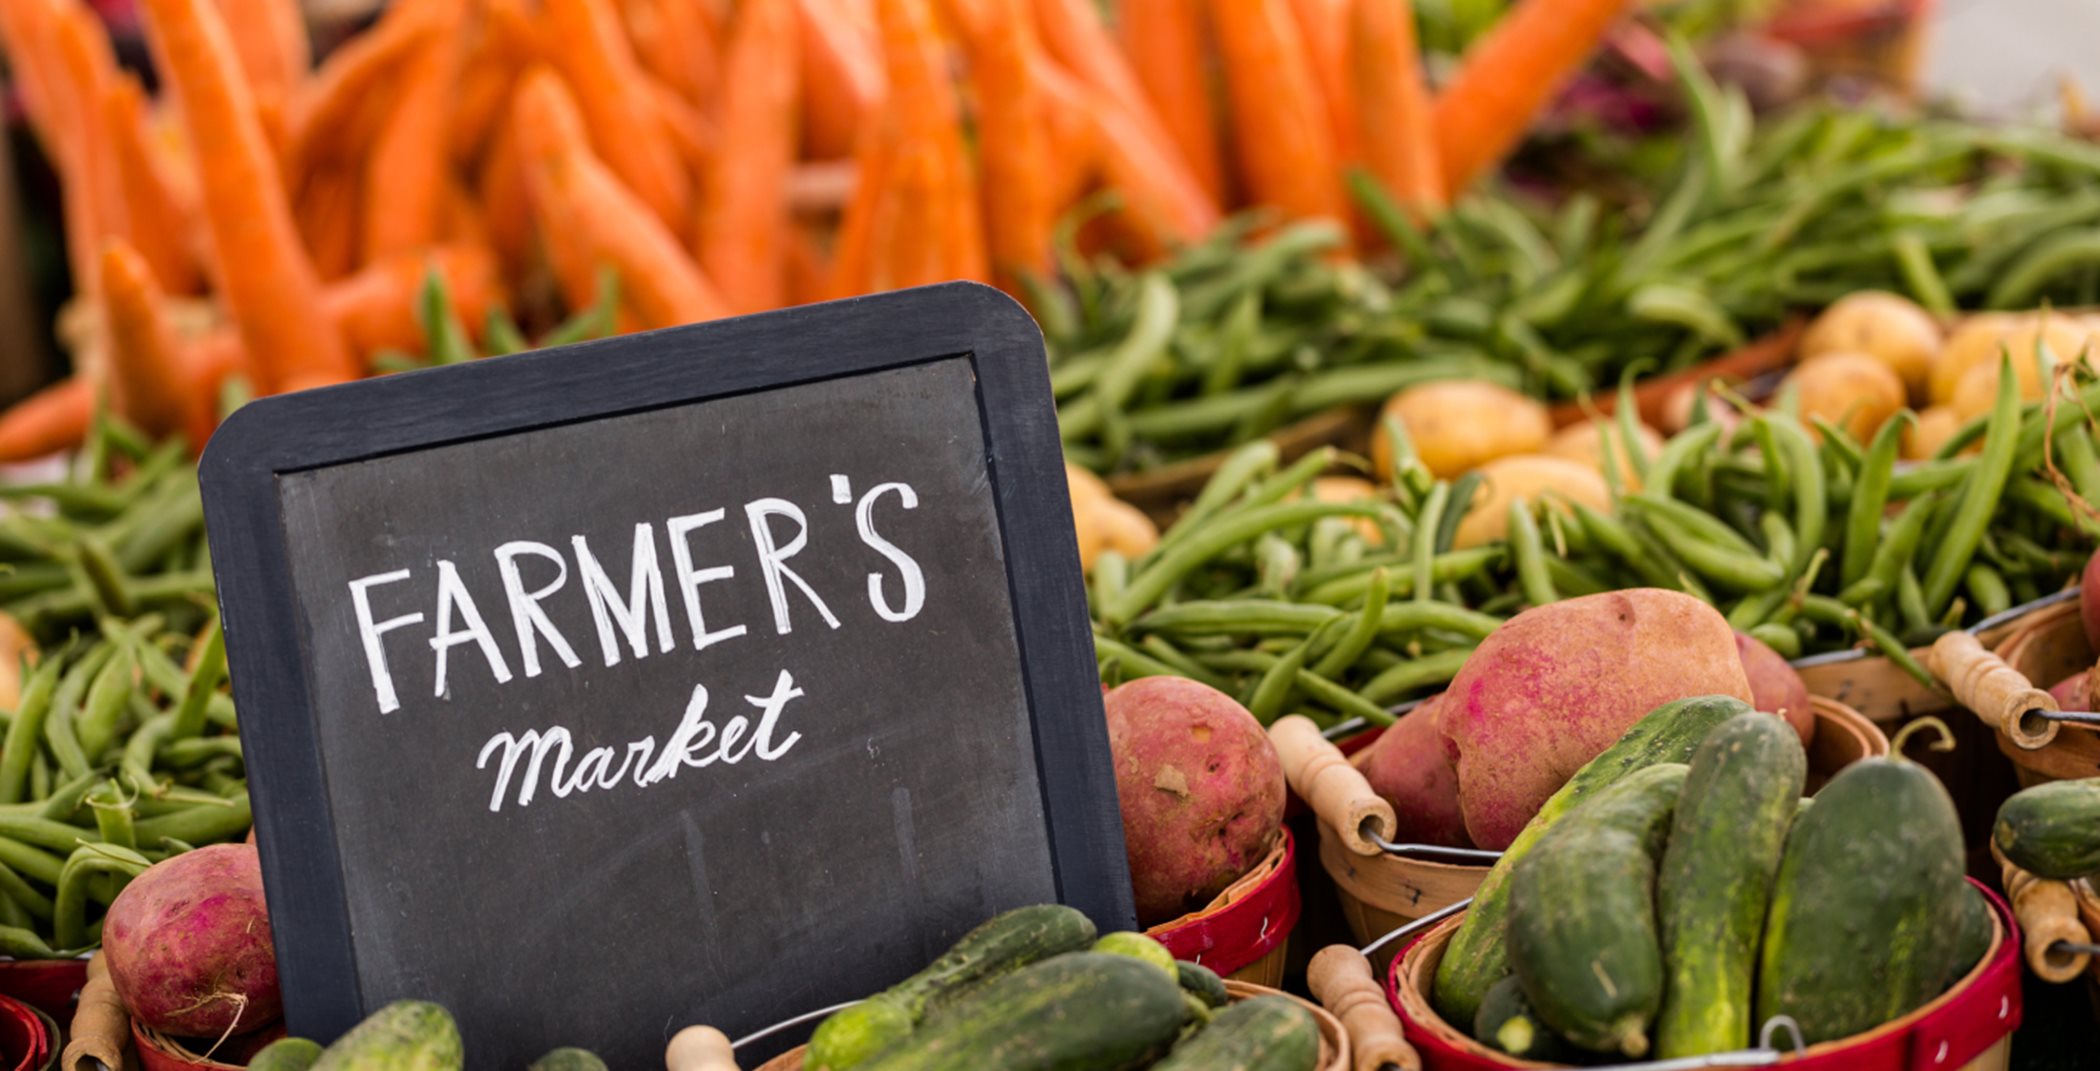 A chalkboard sign that says Farmer's market surrounded by vegetables